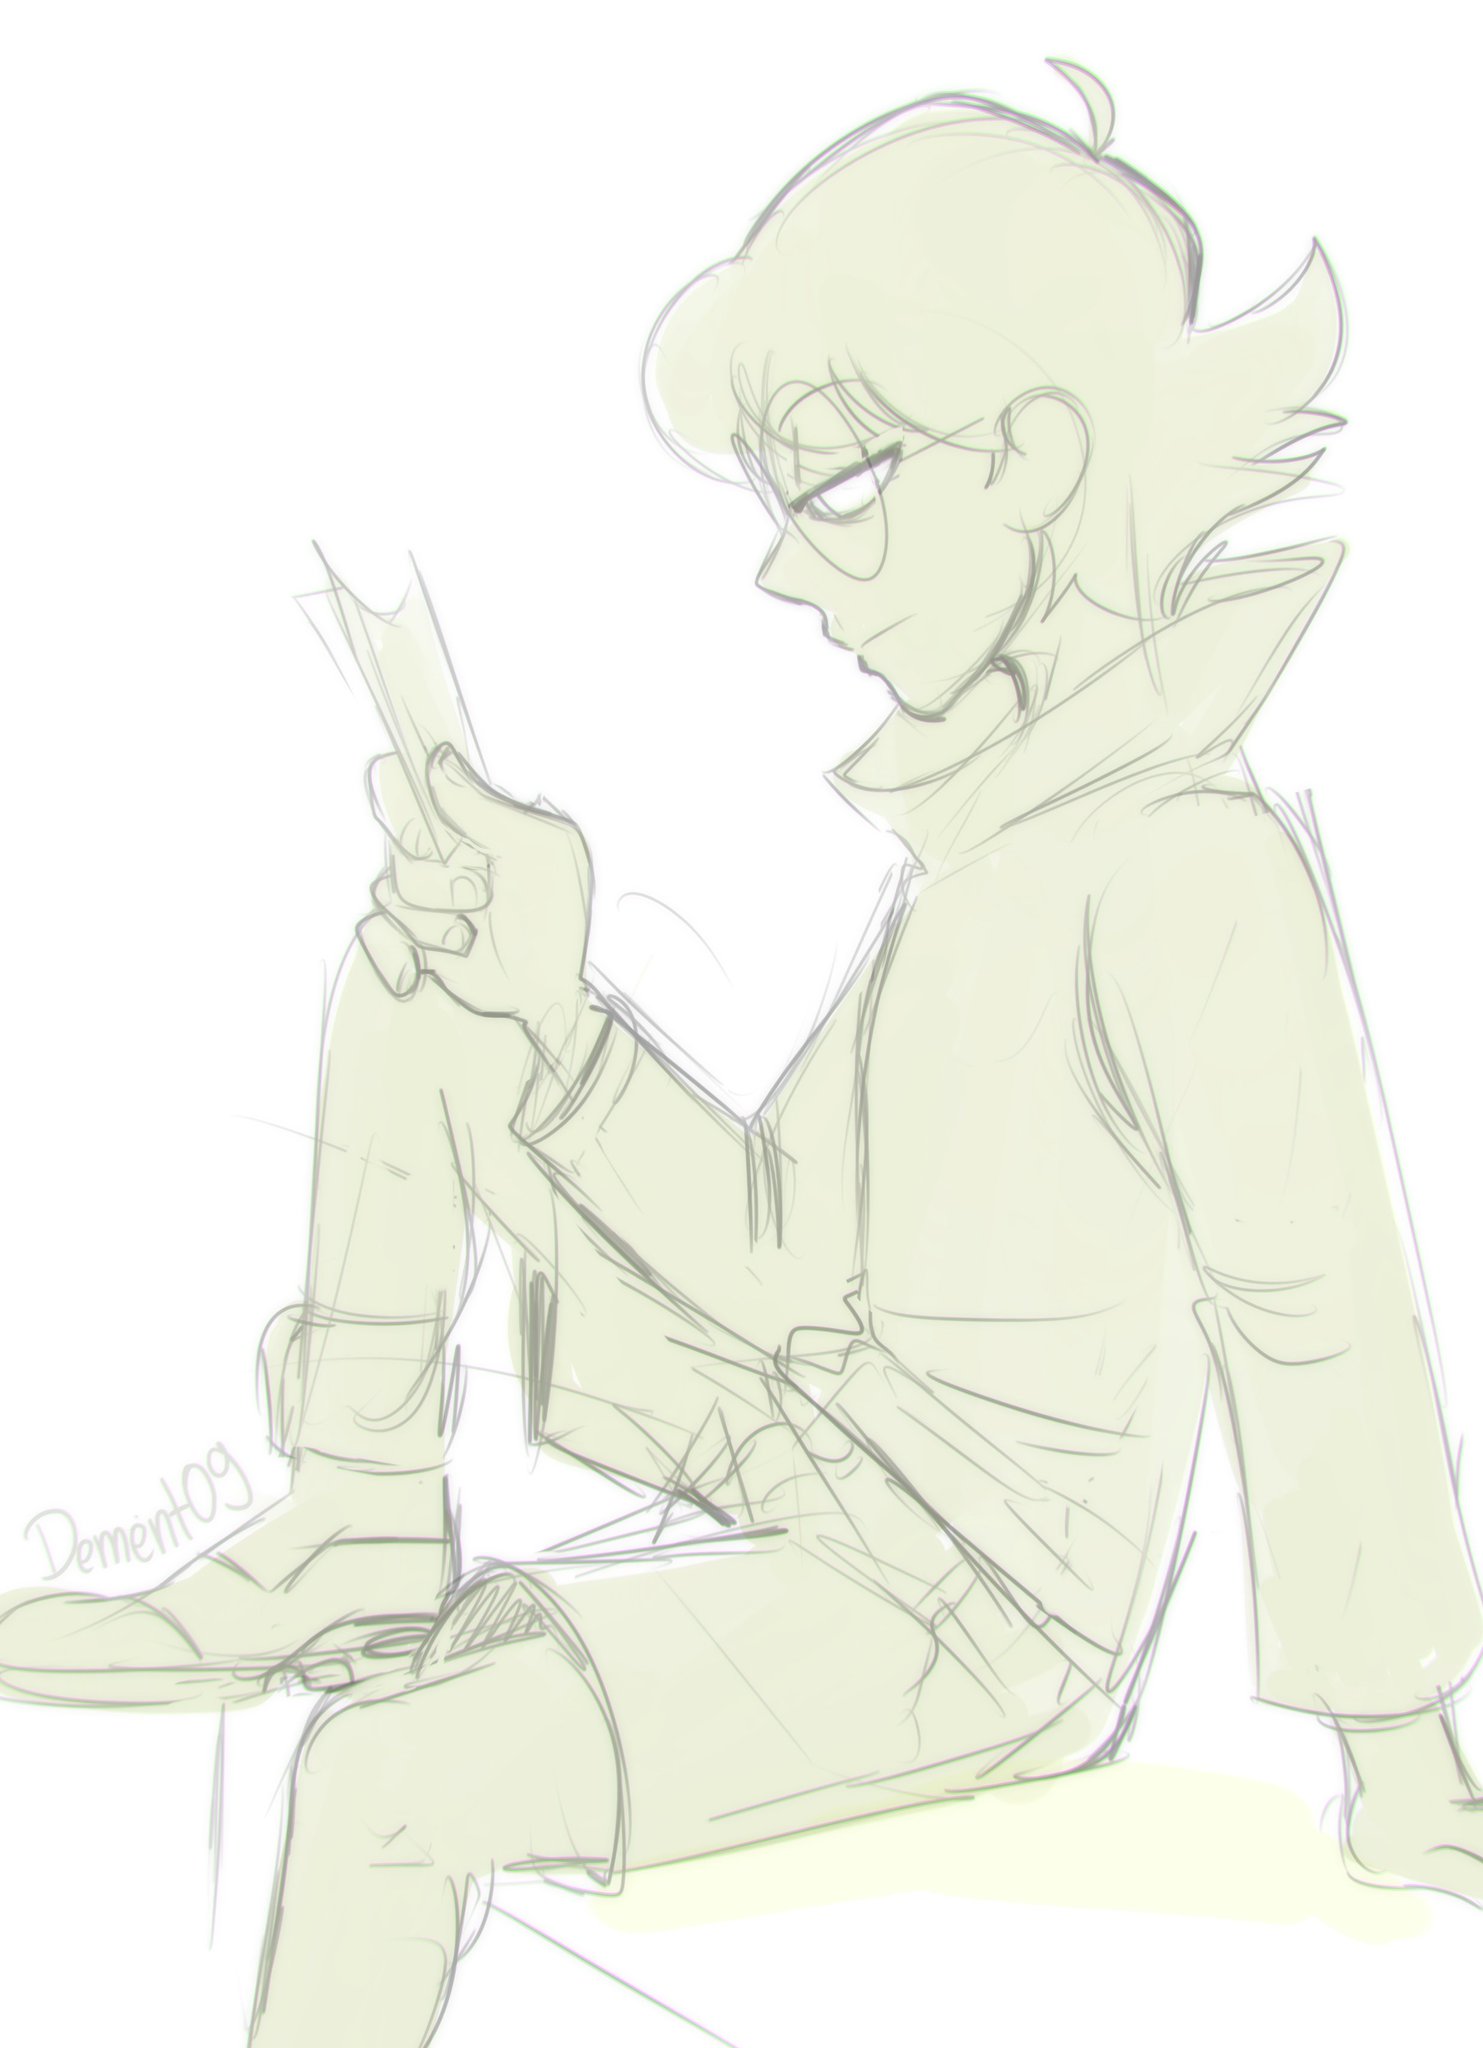 “Oh would you look at that...another green nerdy character i'll be frantically drawing”